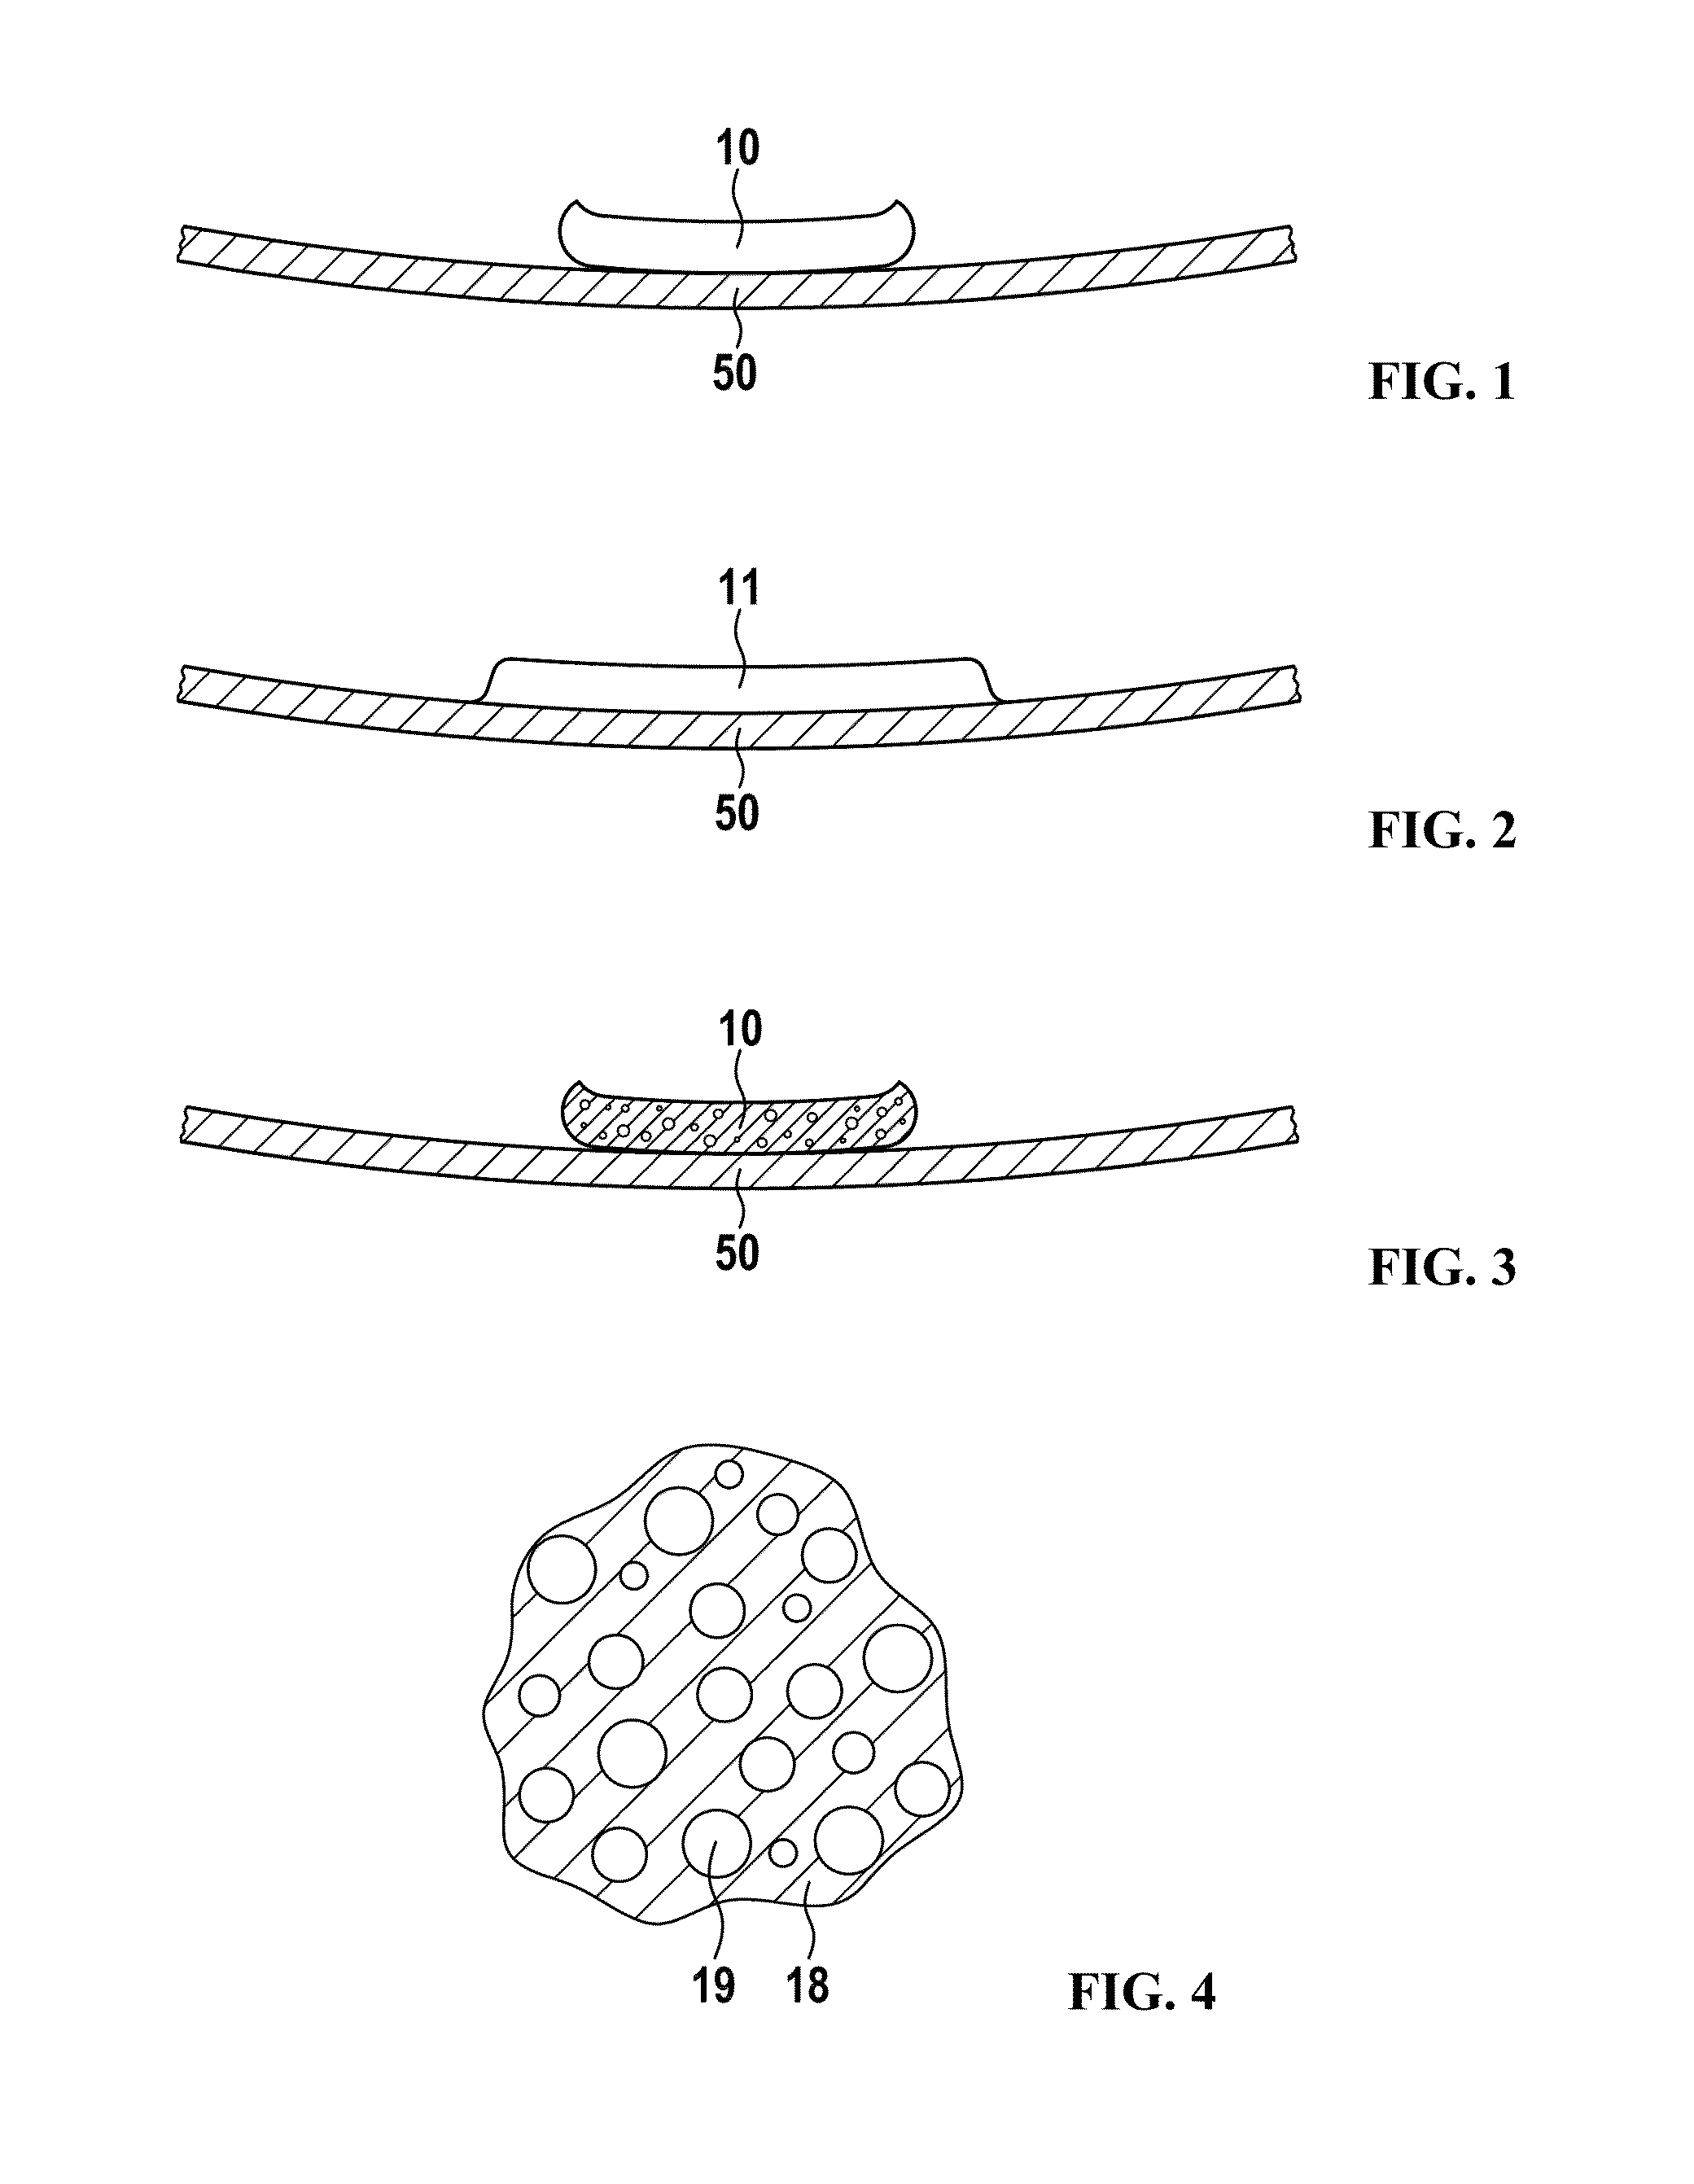 Method and Device for Balancing a Wheel by Application of a Hot-Melt Adhesive Balancing Mass